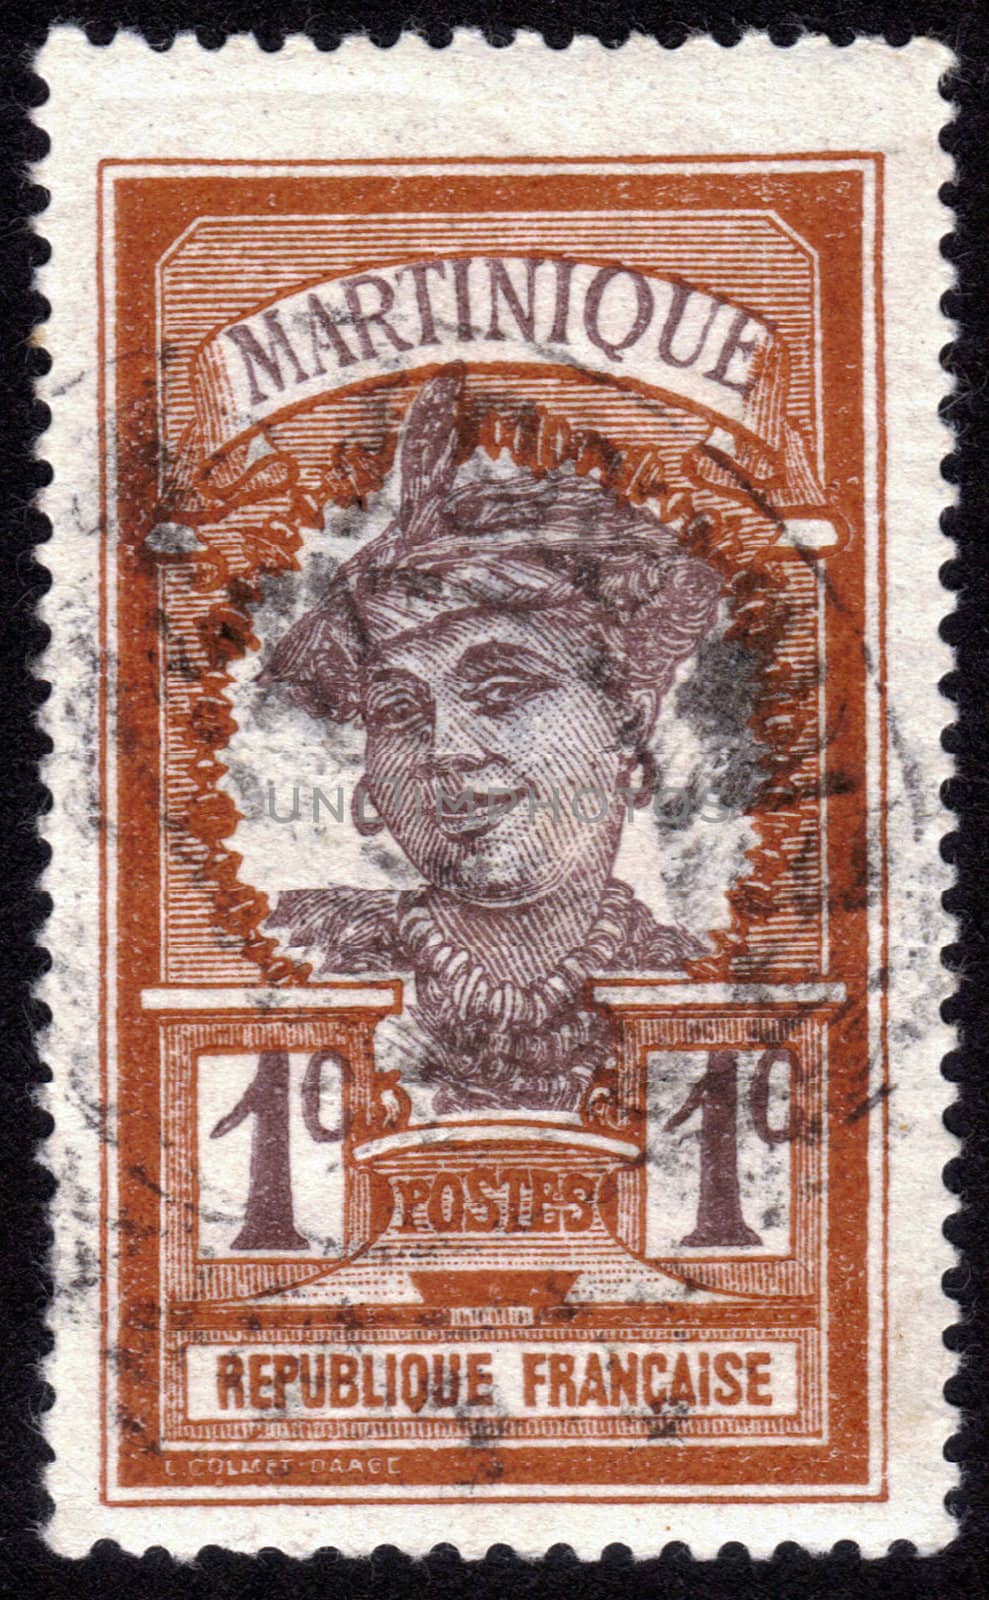 FRANCE - CIRCA 1923: stamp printed in the French colony of Martinique, shows images of woman in traditional head dress, Martinique, series, circa 1923